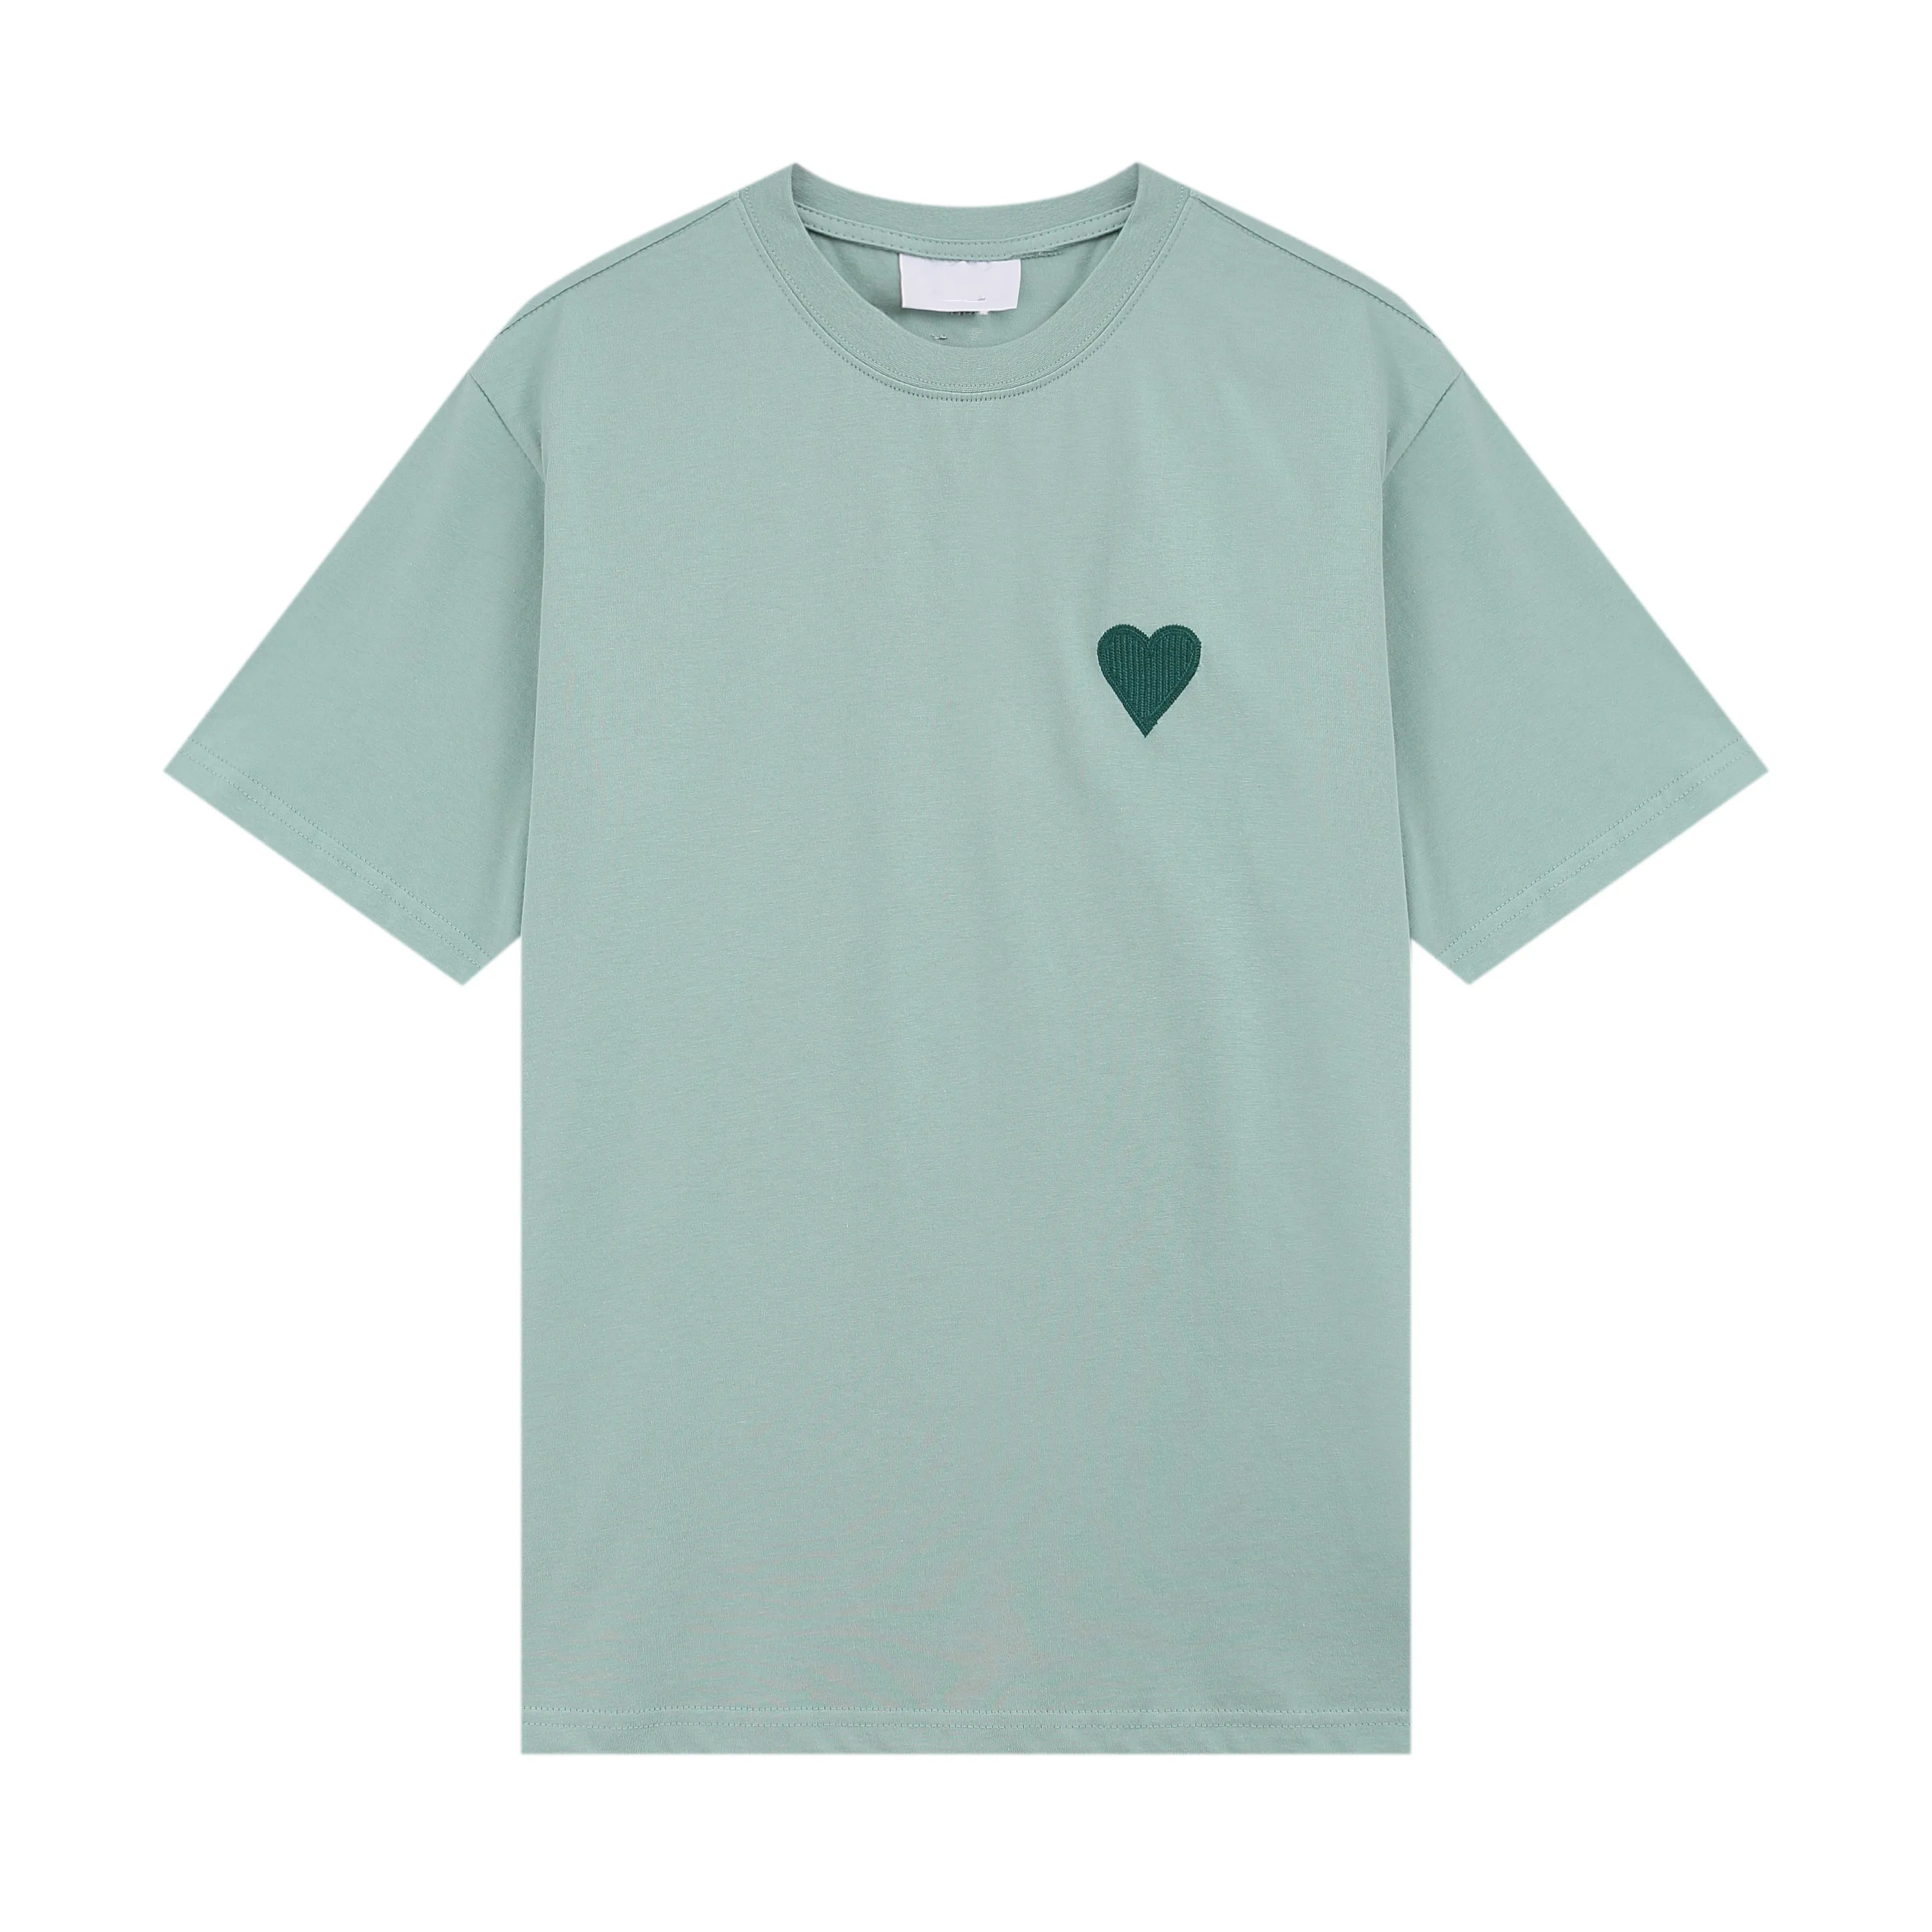 Amis Designer Pure Cotton Heart Shirt For Men And Women 2023 Spring/Autumn  Collection From Lynnice, $7.79